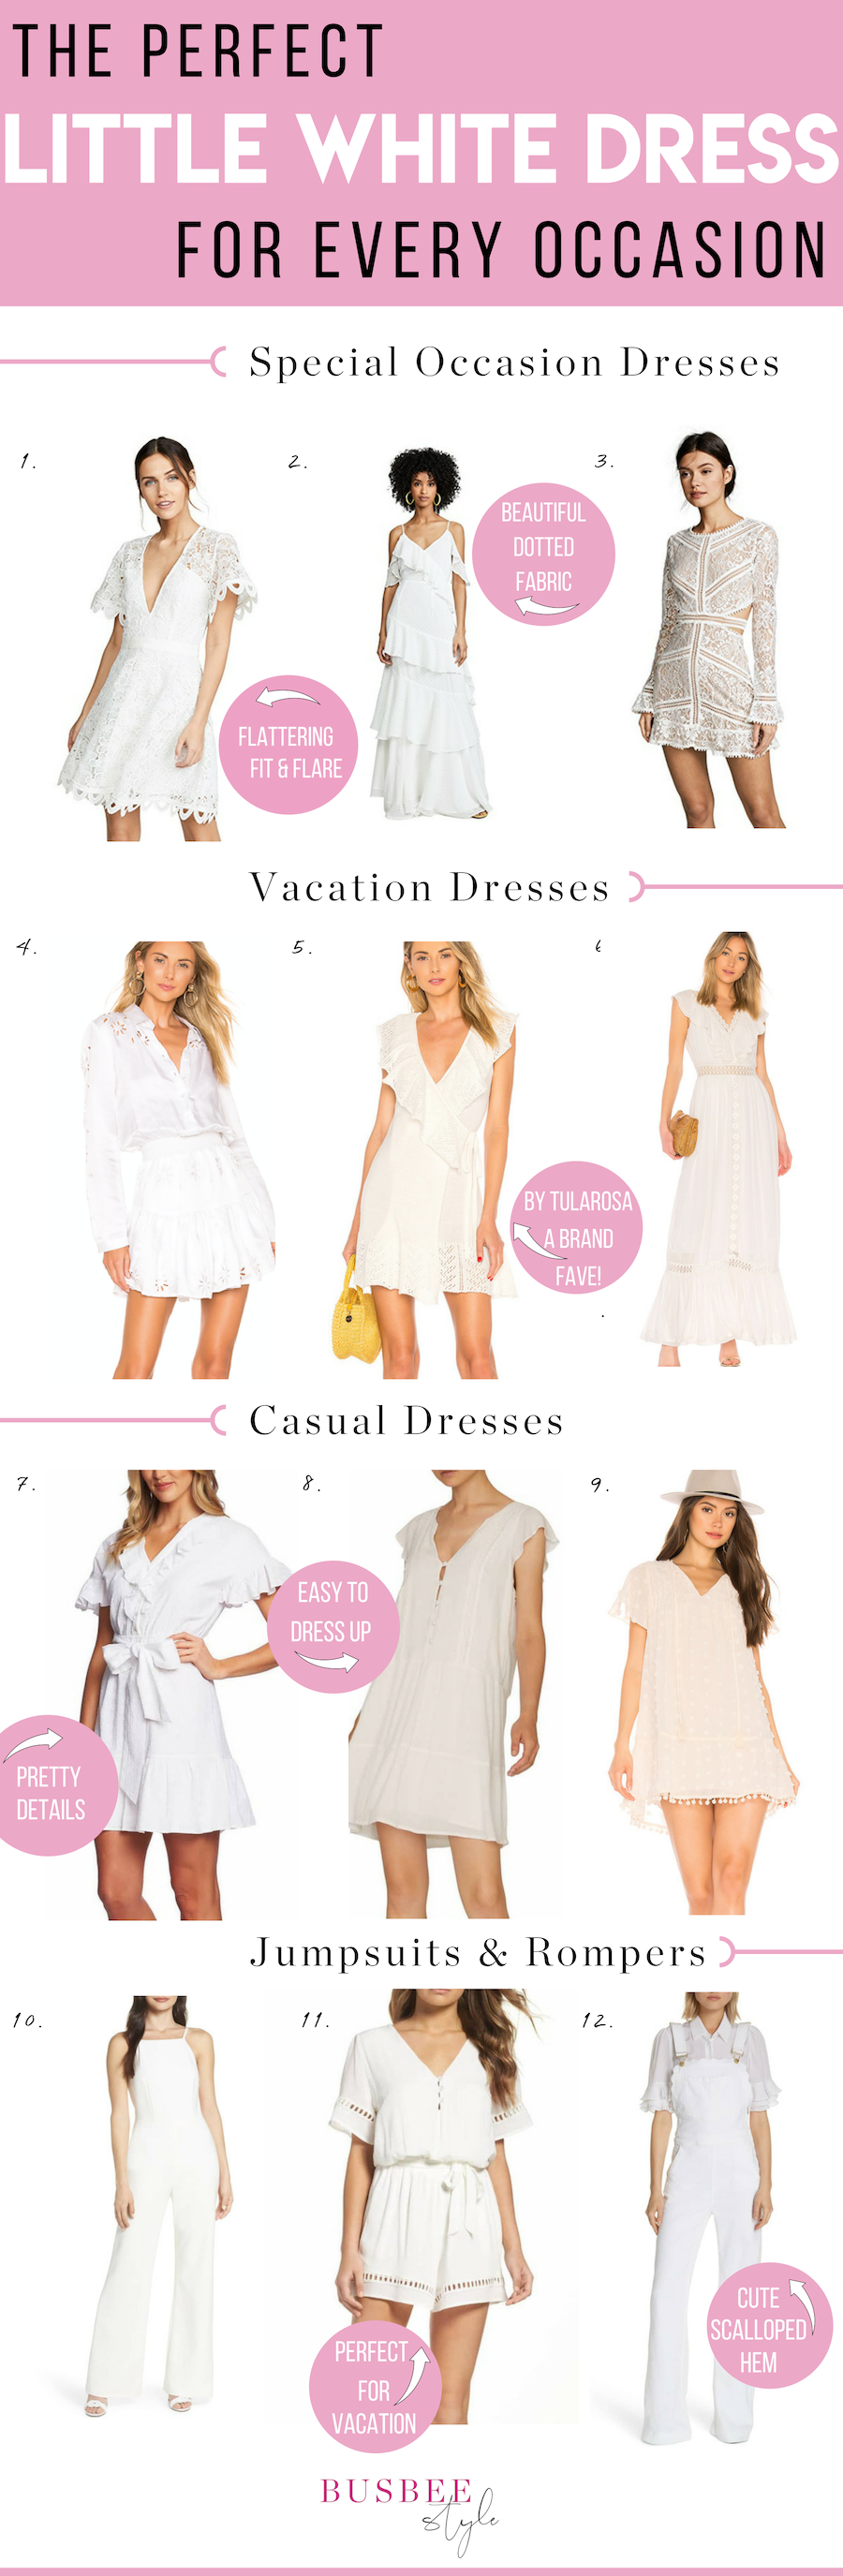 perfect little white dress options for summer